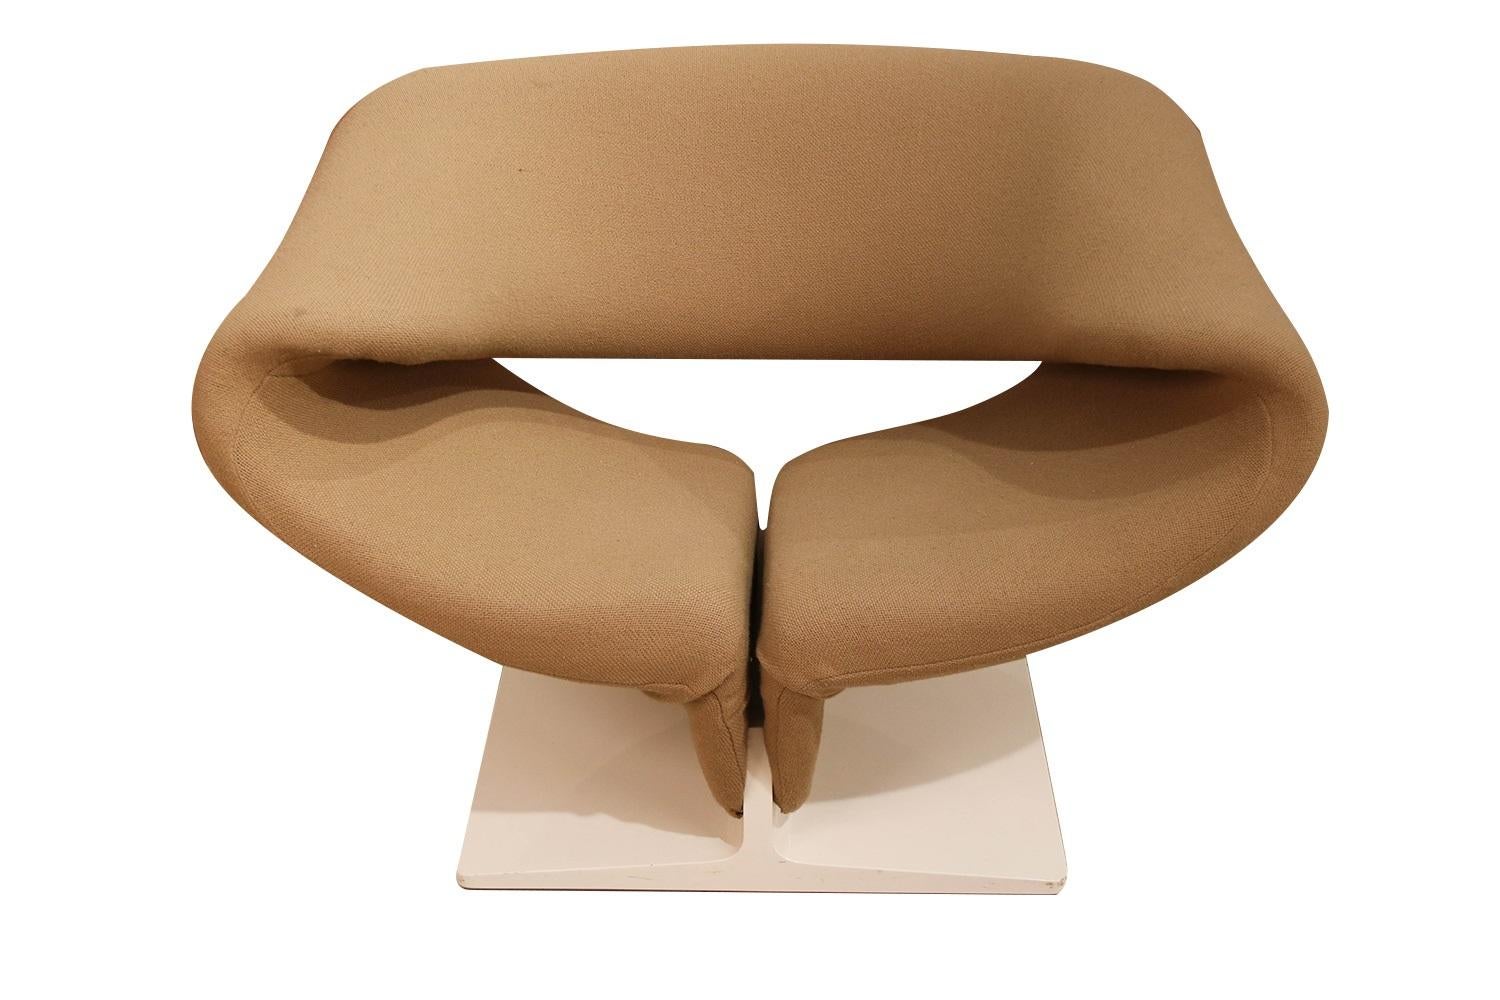 Iconic Artifort ribbon armchair designed by Pierre Paulin. This is an amazing sculptural chair design of the well-known ribbon form by Pierre Paulin from 1966. The chair features a metal frame with horizontal springs, covered with foam and wool